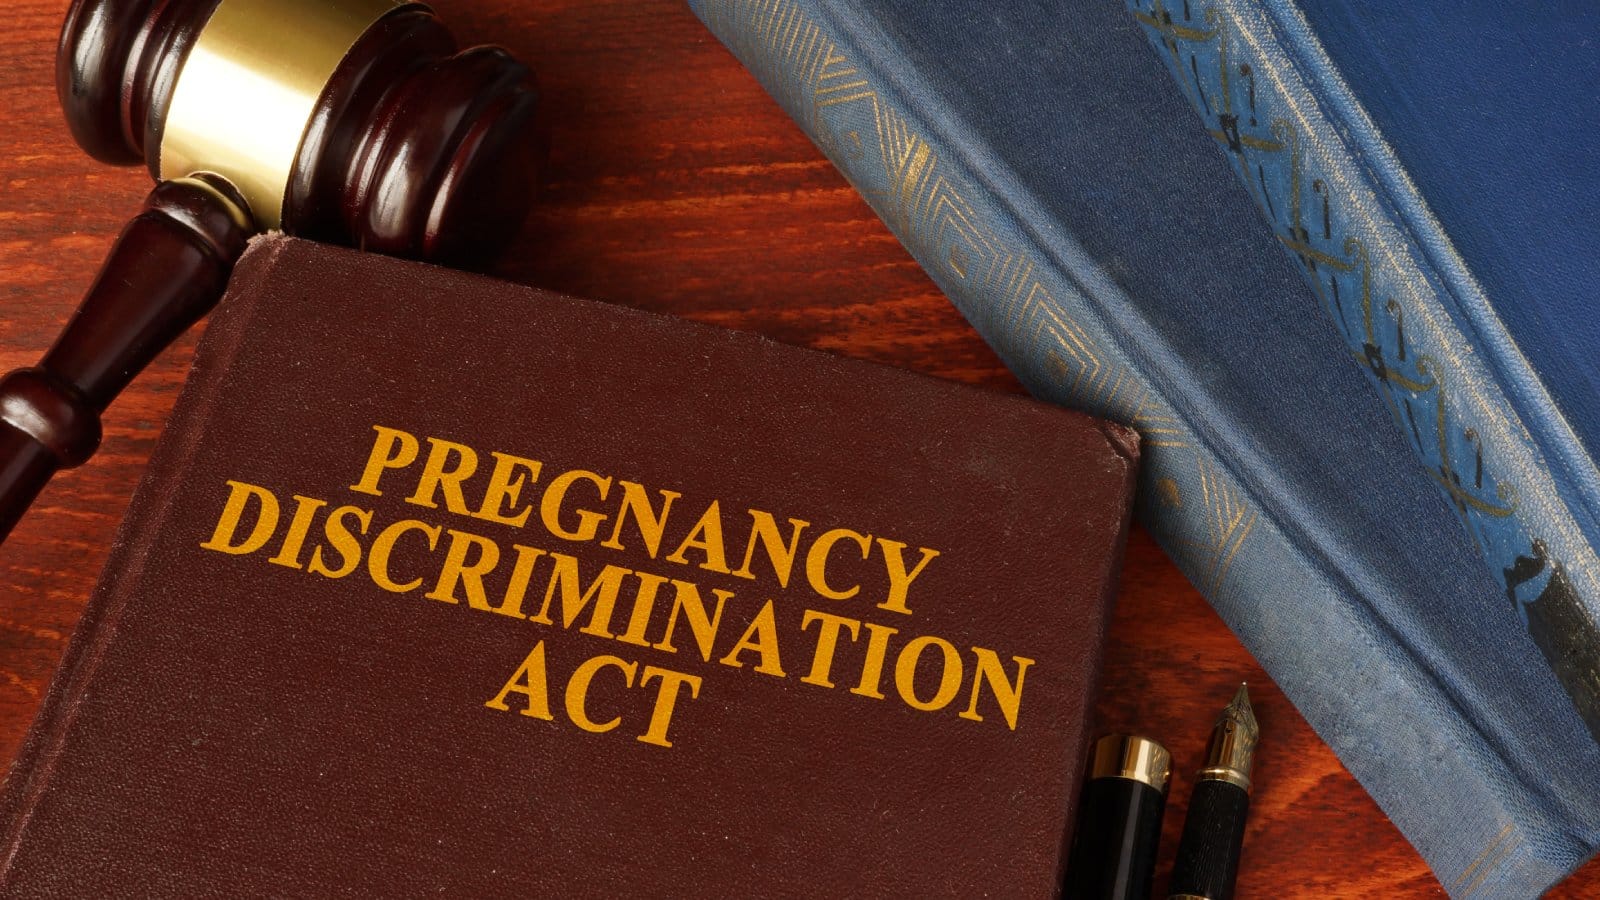 Image Credit: Shutterstock / Vitalii Vodolazskyi <p><span>This legislation amended Title VII of the Civil Rights Act to prohibit discrimination on the basis of pregnancy, childbirth, or related medical conditions, protecting women from workplace discrimination and ensuring equal employment opportunities during and after pregnancy.</span></p>